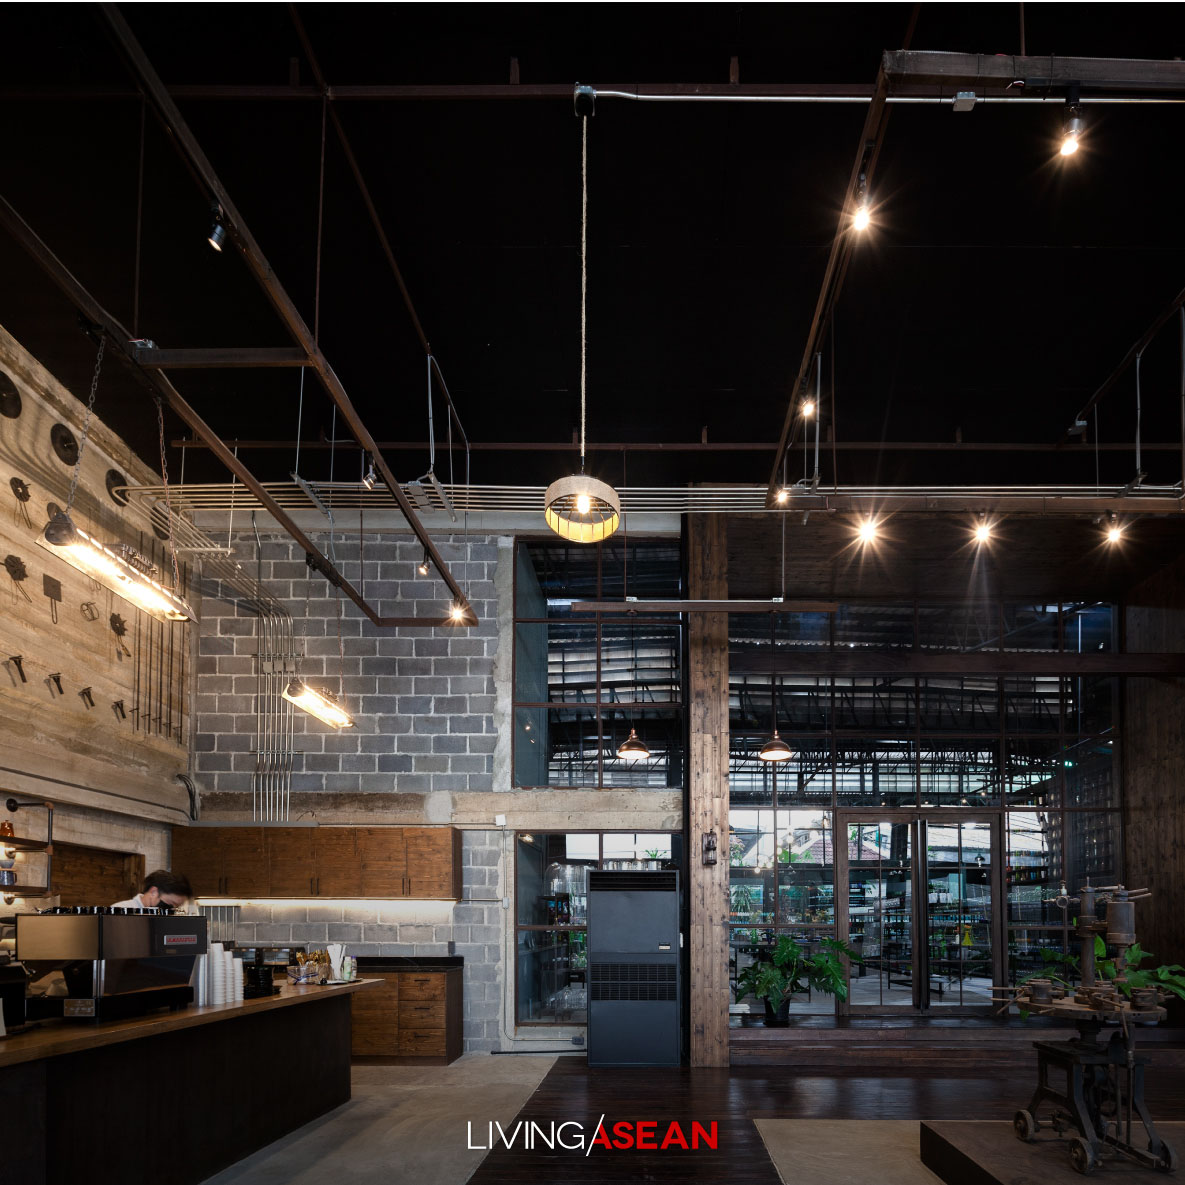 Easternglass Café the Beauty of an Industrial Loft Space